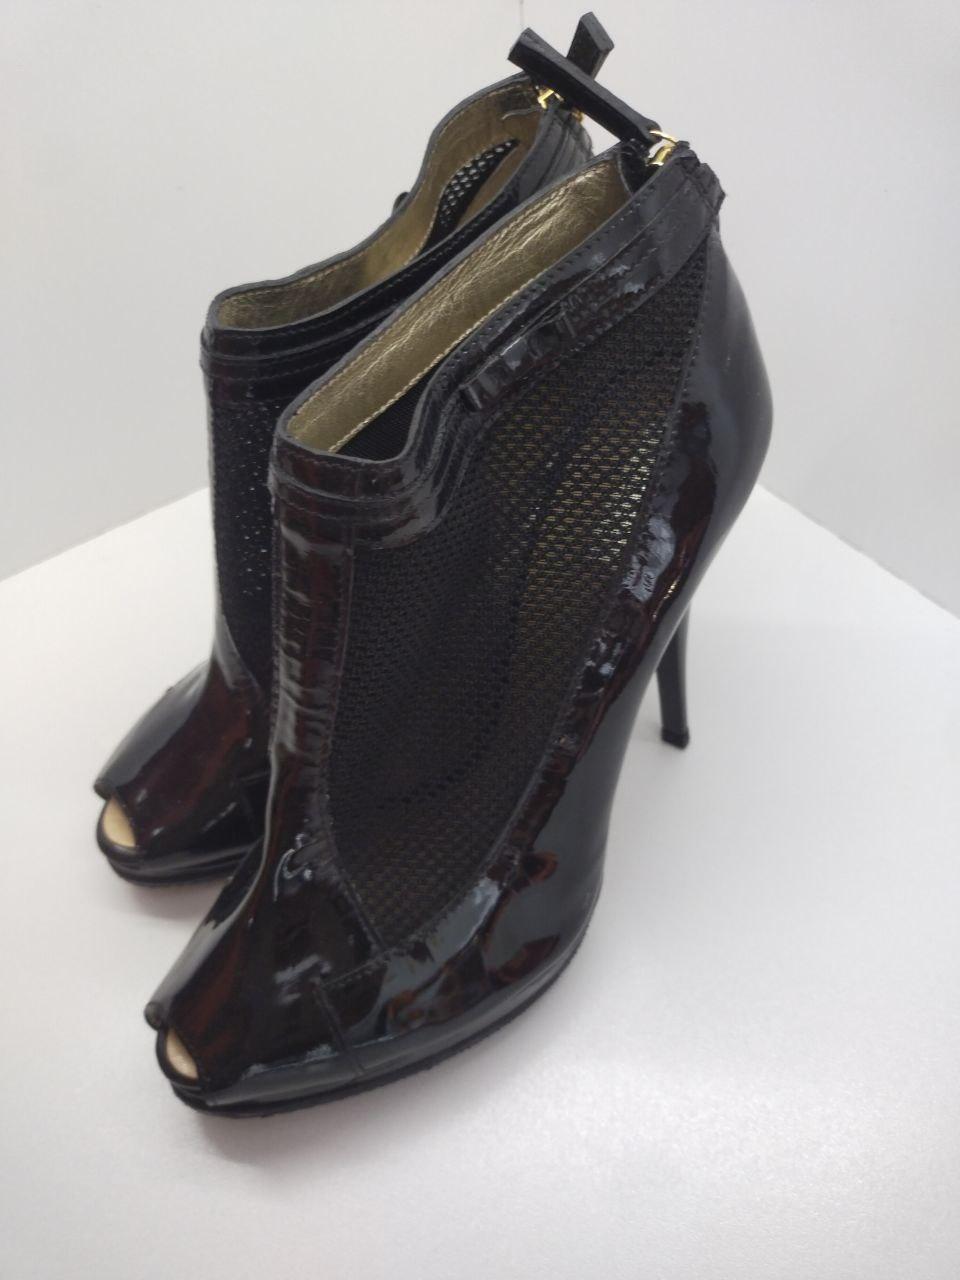 ROBERTO CAVALLI Fall 2008 Ready-to-Wear Collection BOOTS For Sale 13